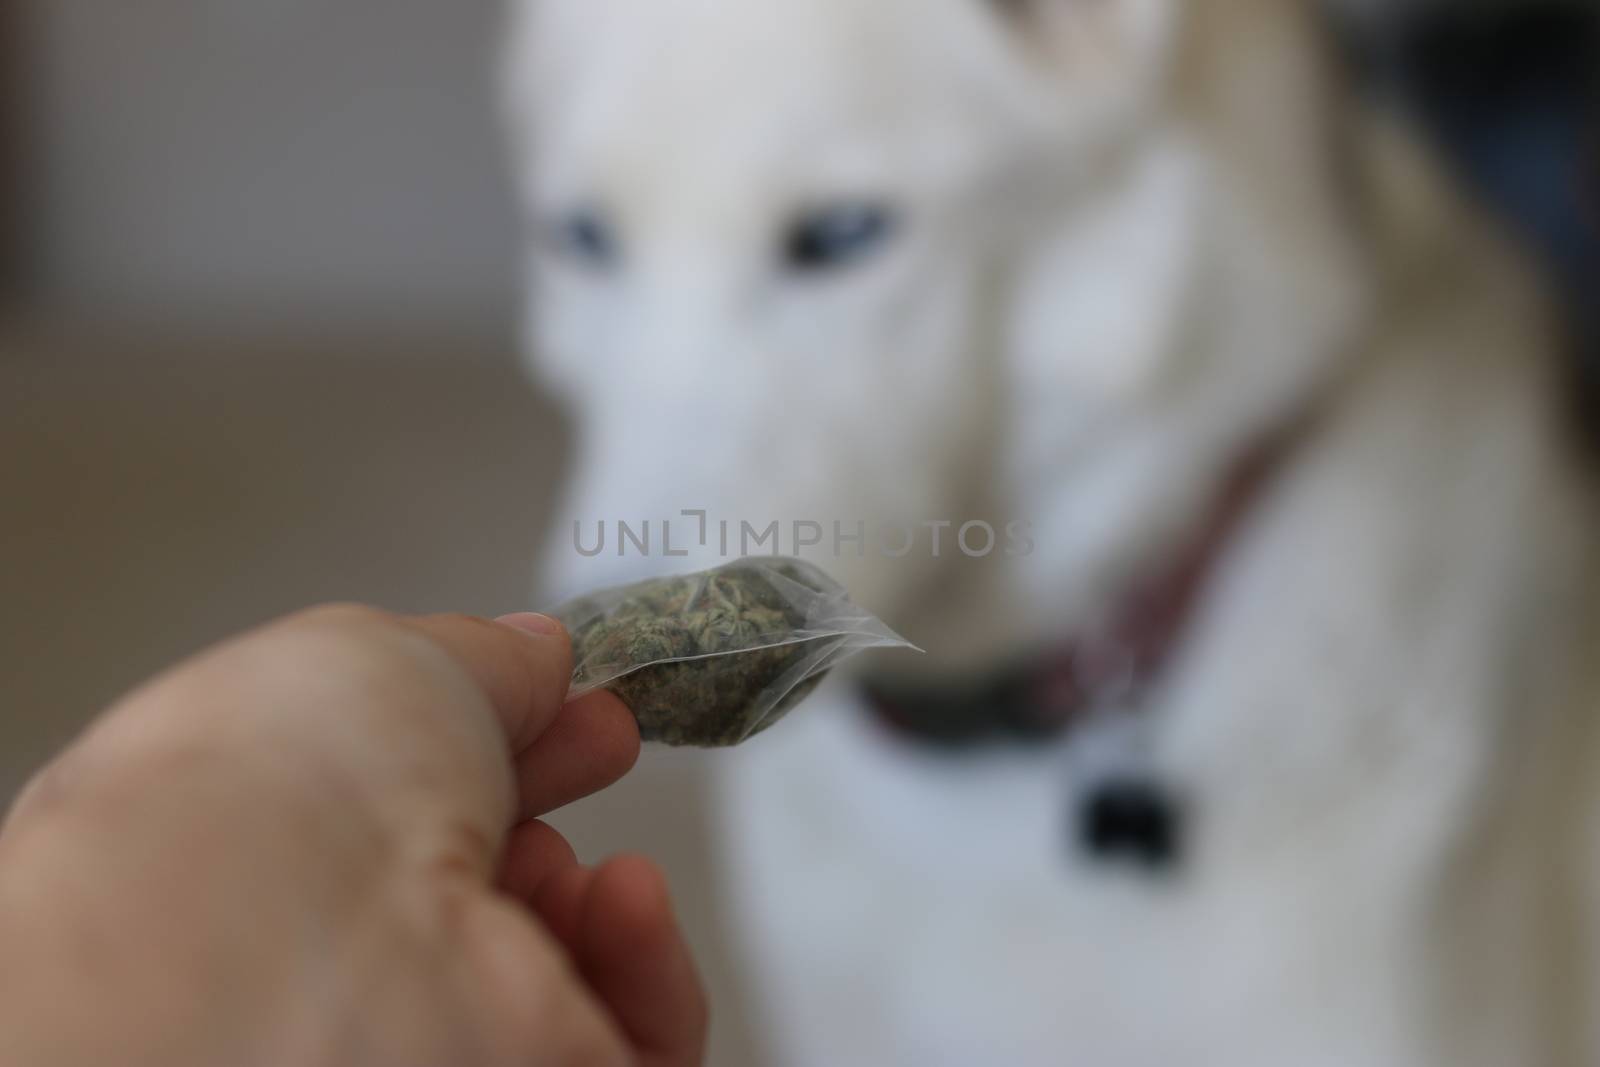 Holding a bag of marijuana in front of a husky dog. Theme of dog and cannabis usage.